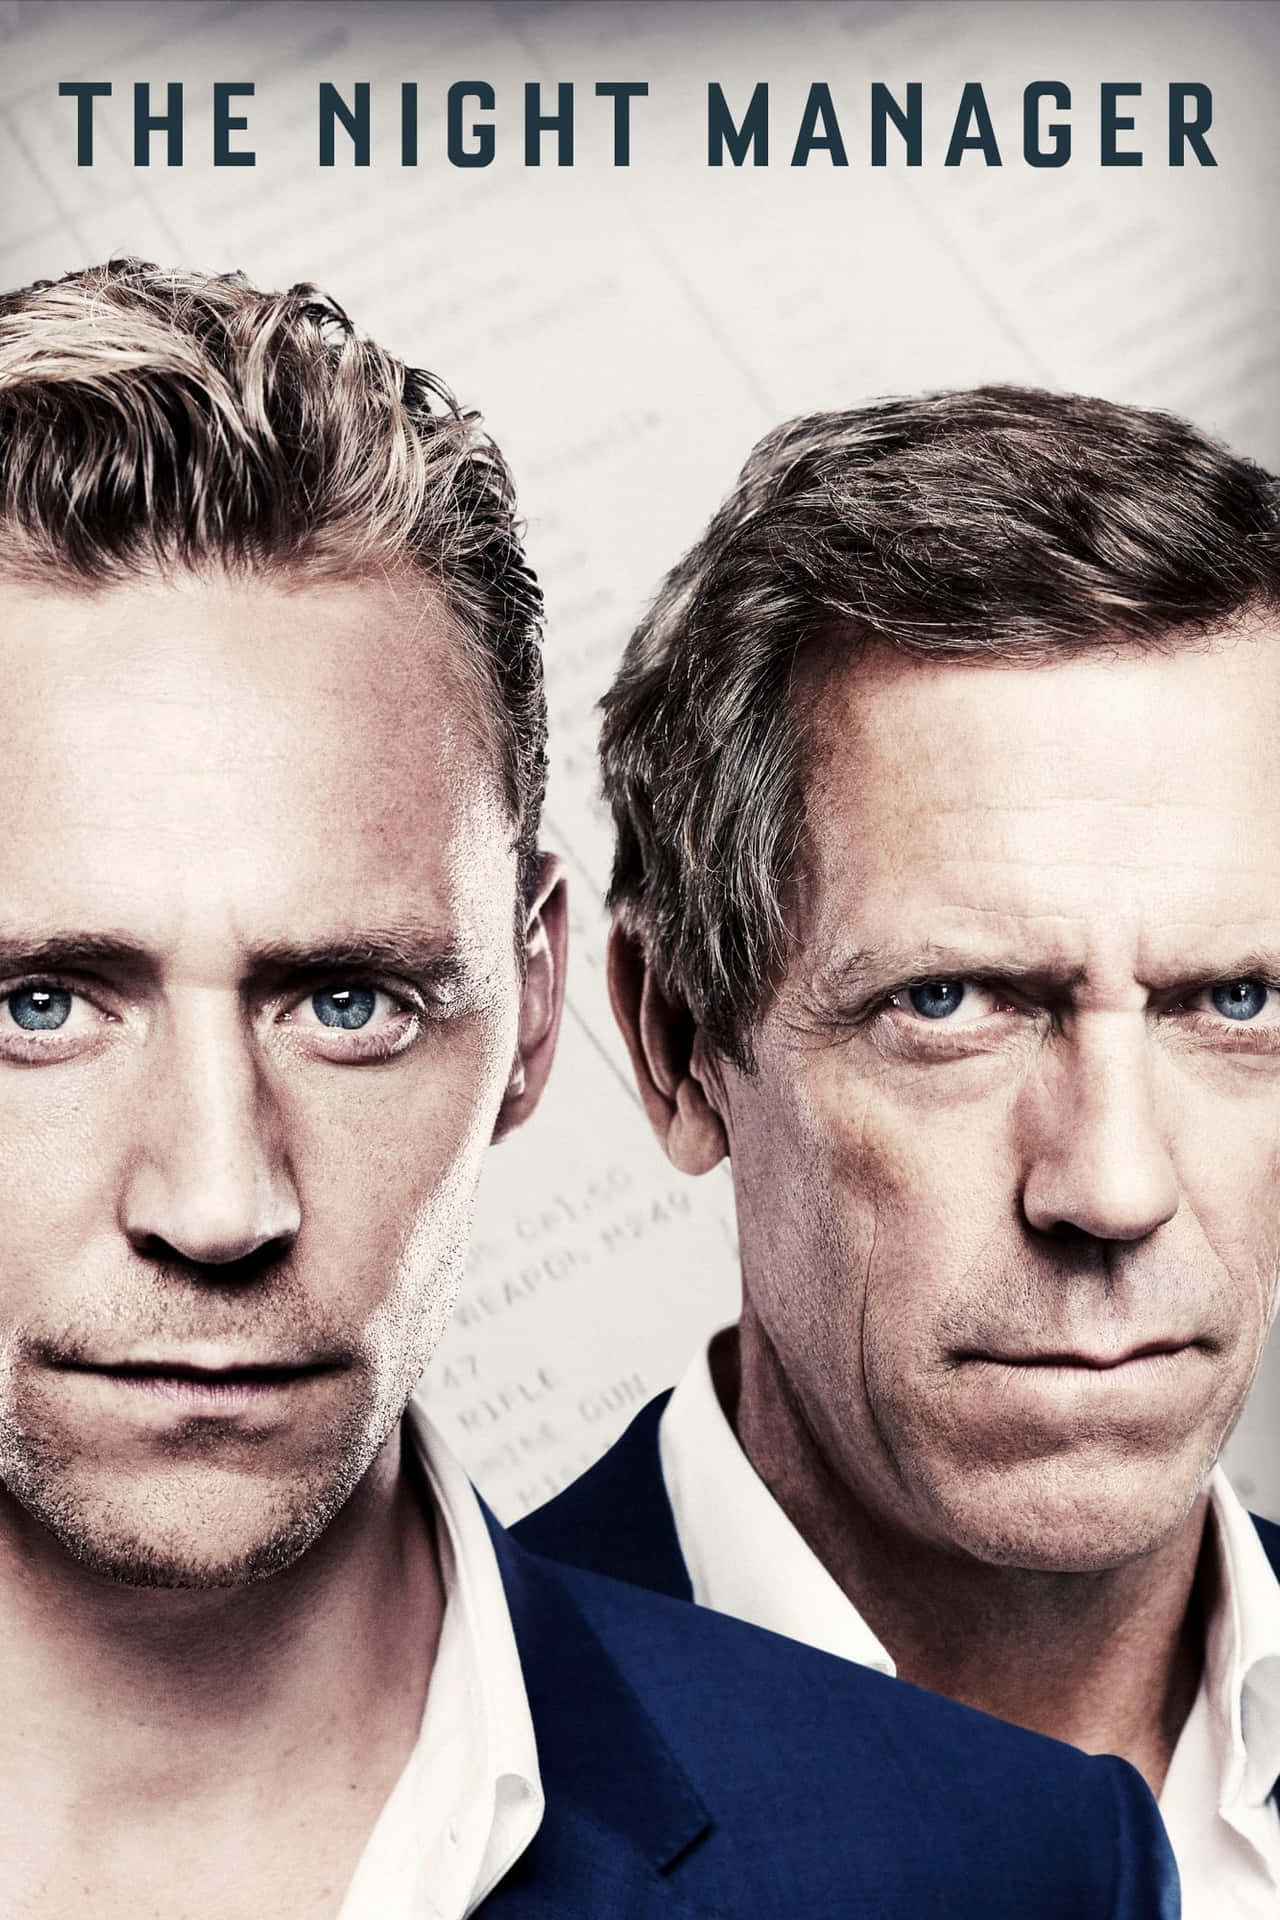 The Night Manager Series Action Scene Wallpaper